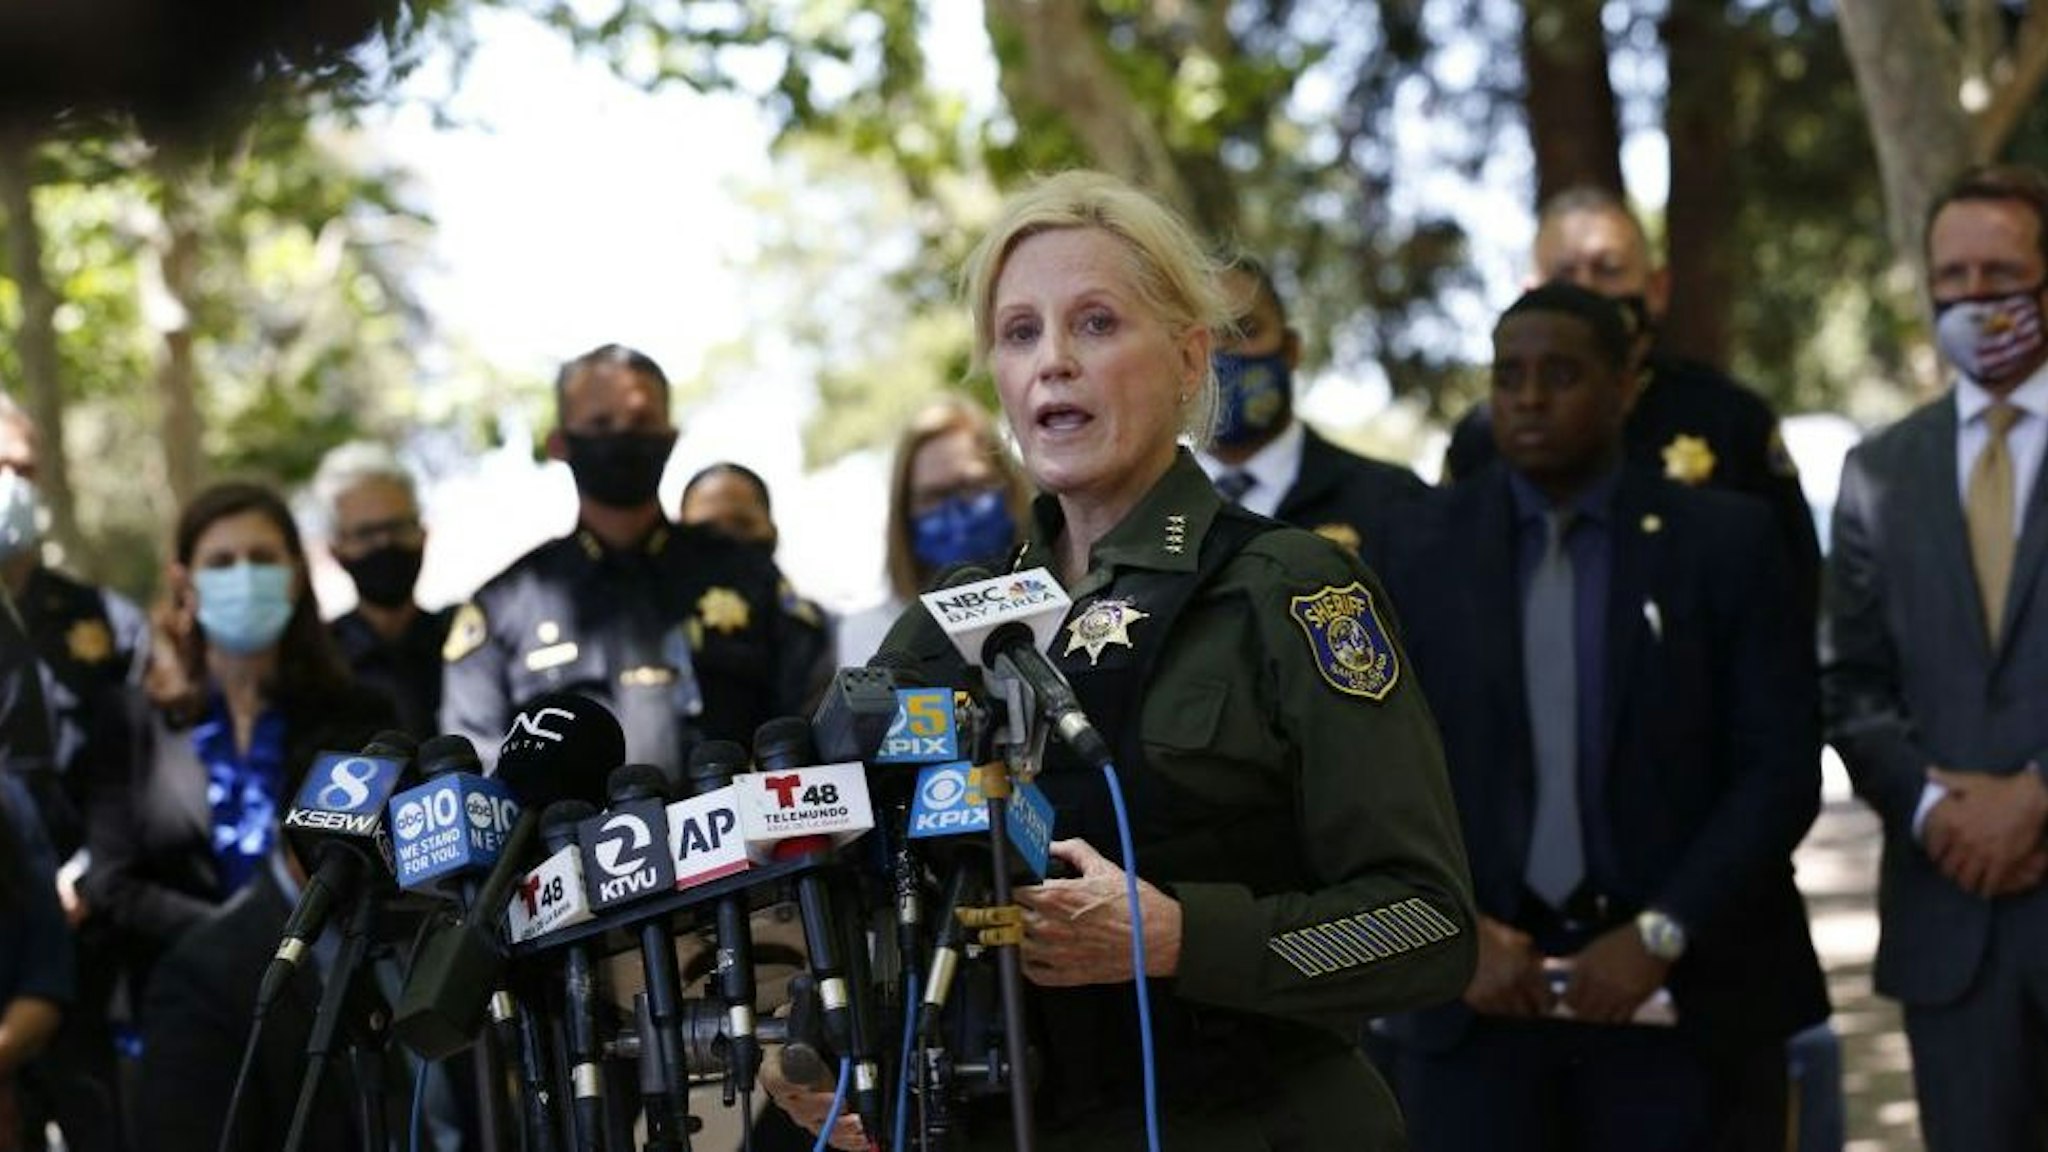 Santa Clara County Sheriff Laurie Smith speaks during a news conference regarding the San Jose rail yard shooting in San Jose, California on,May 26, 2021. - The suspect in a mass shooting that killed eight people at a California rail yard May 26, 2021 took his own life as law enforcement arrived at the scene, the local sheriff said. Several other victims suffered injuries in the attack at a train maintenance compound in San Jose, just south of San Francisco.